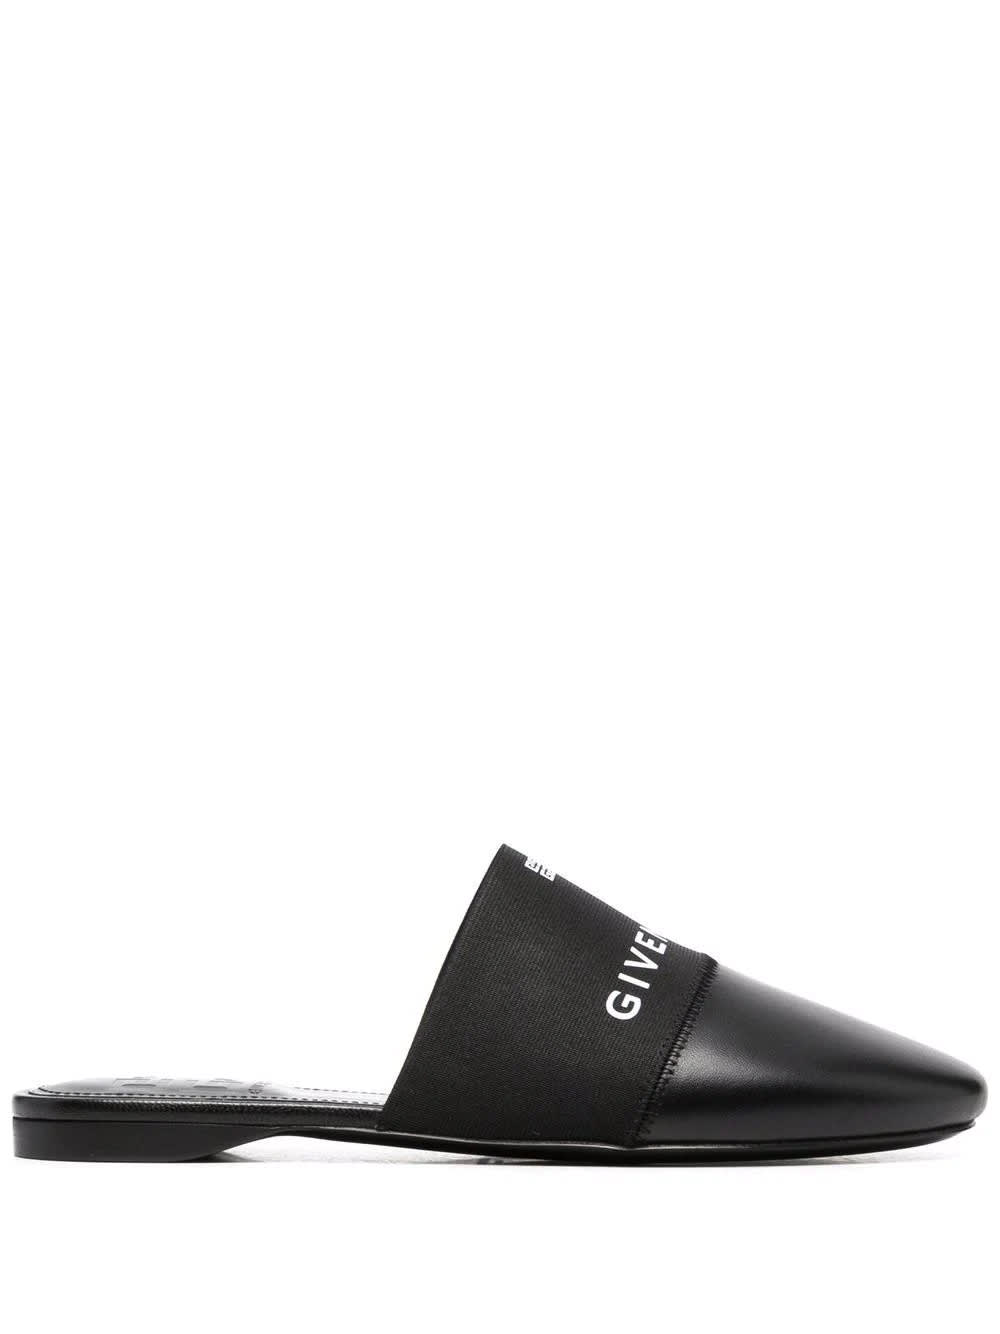 Givenchy Woman 4g Flat Mules In Black Leather